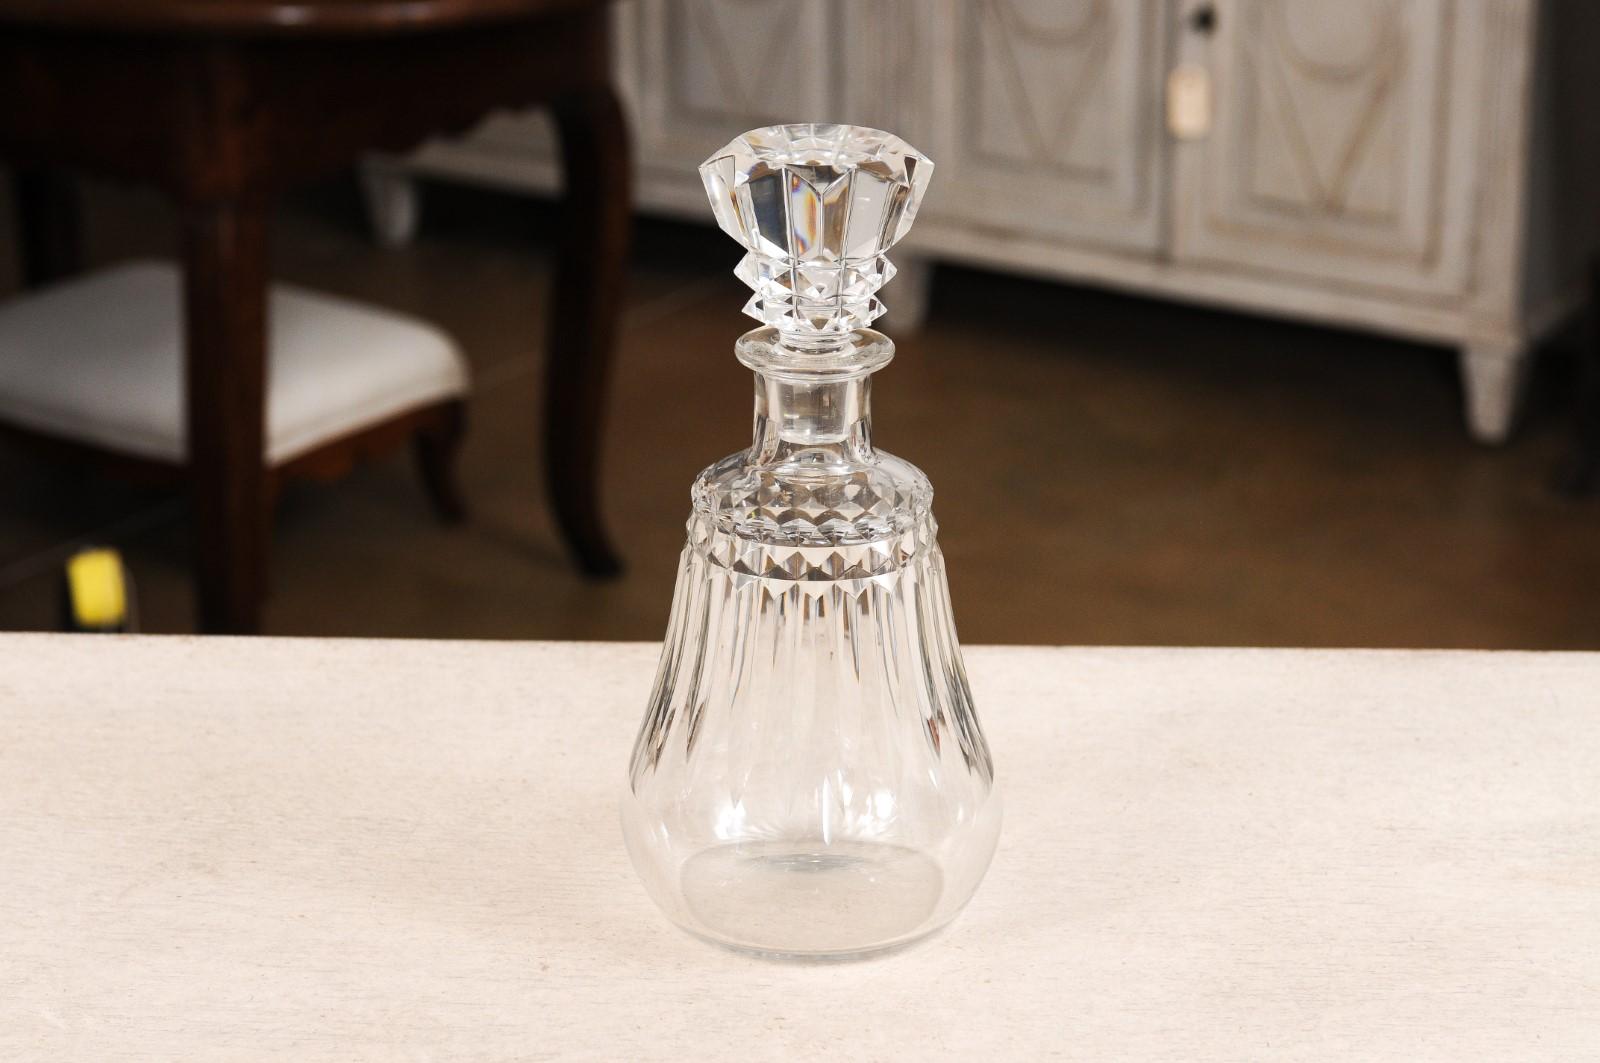 French Baccarat Crystal 1940s Pear Shaped Decanter with Cutaway Motifs For Sale 5